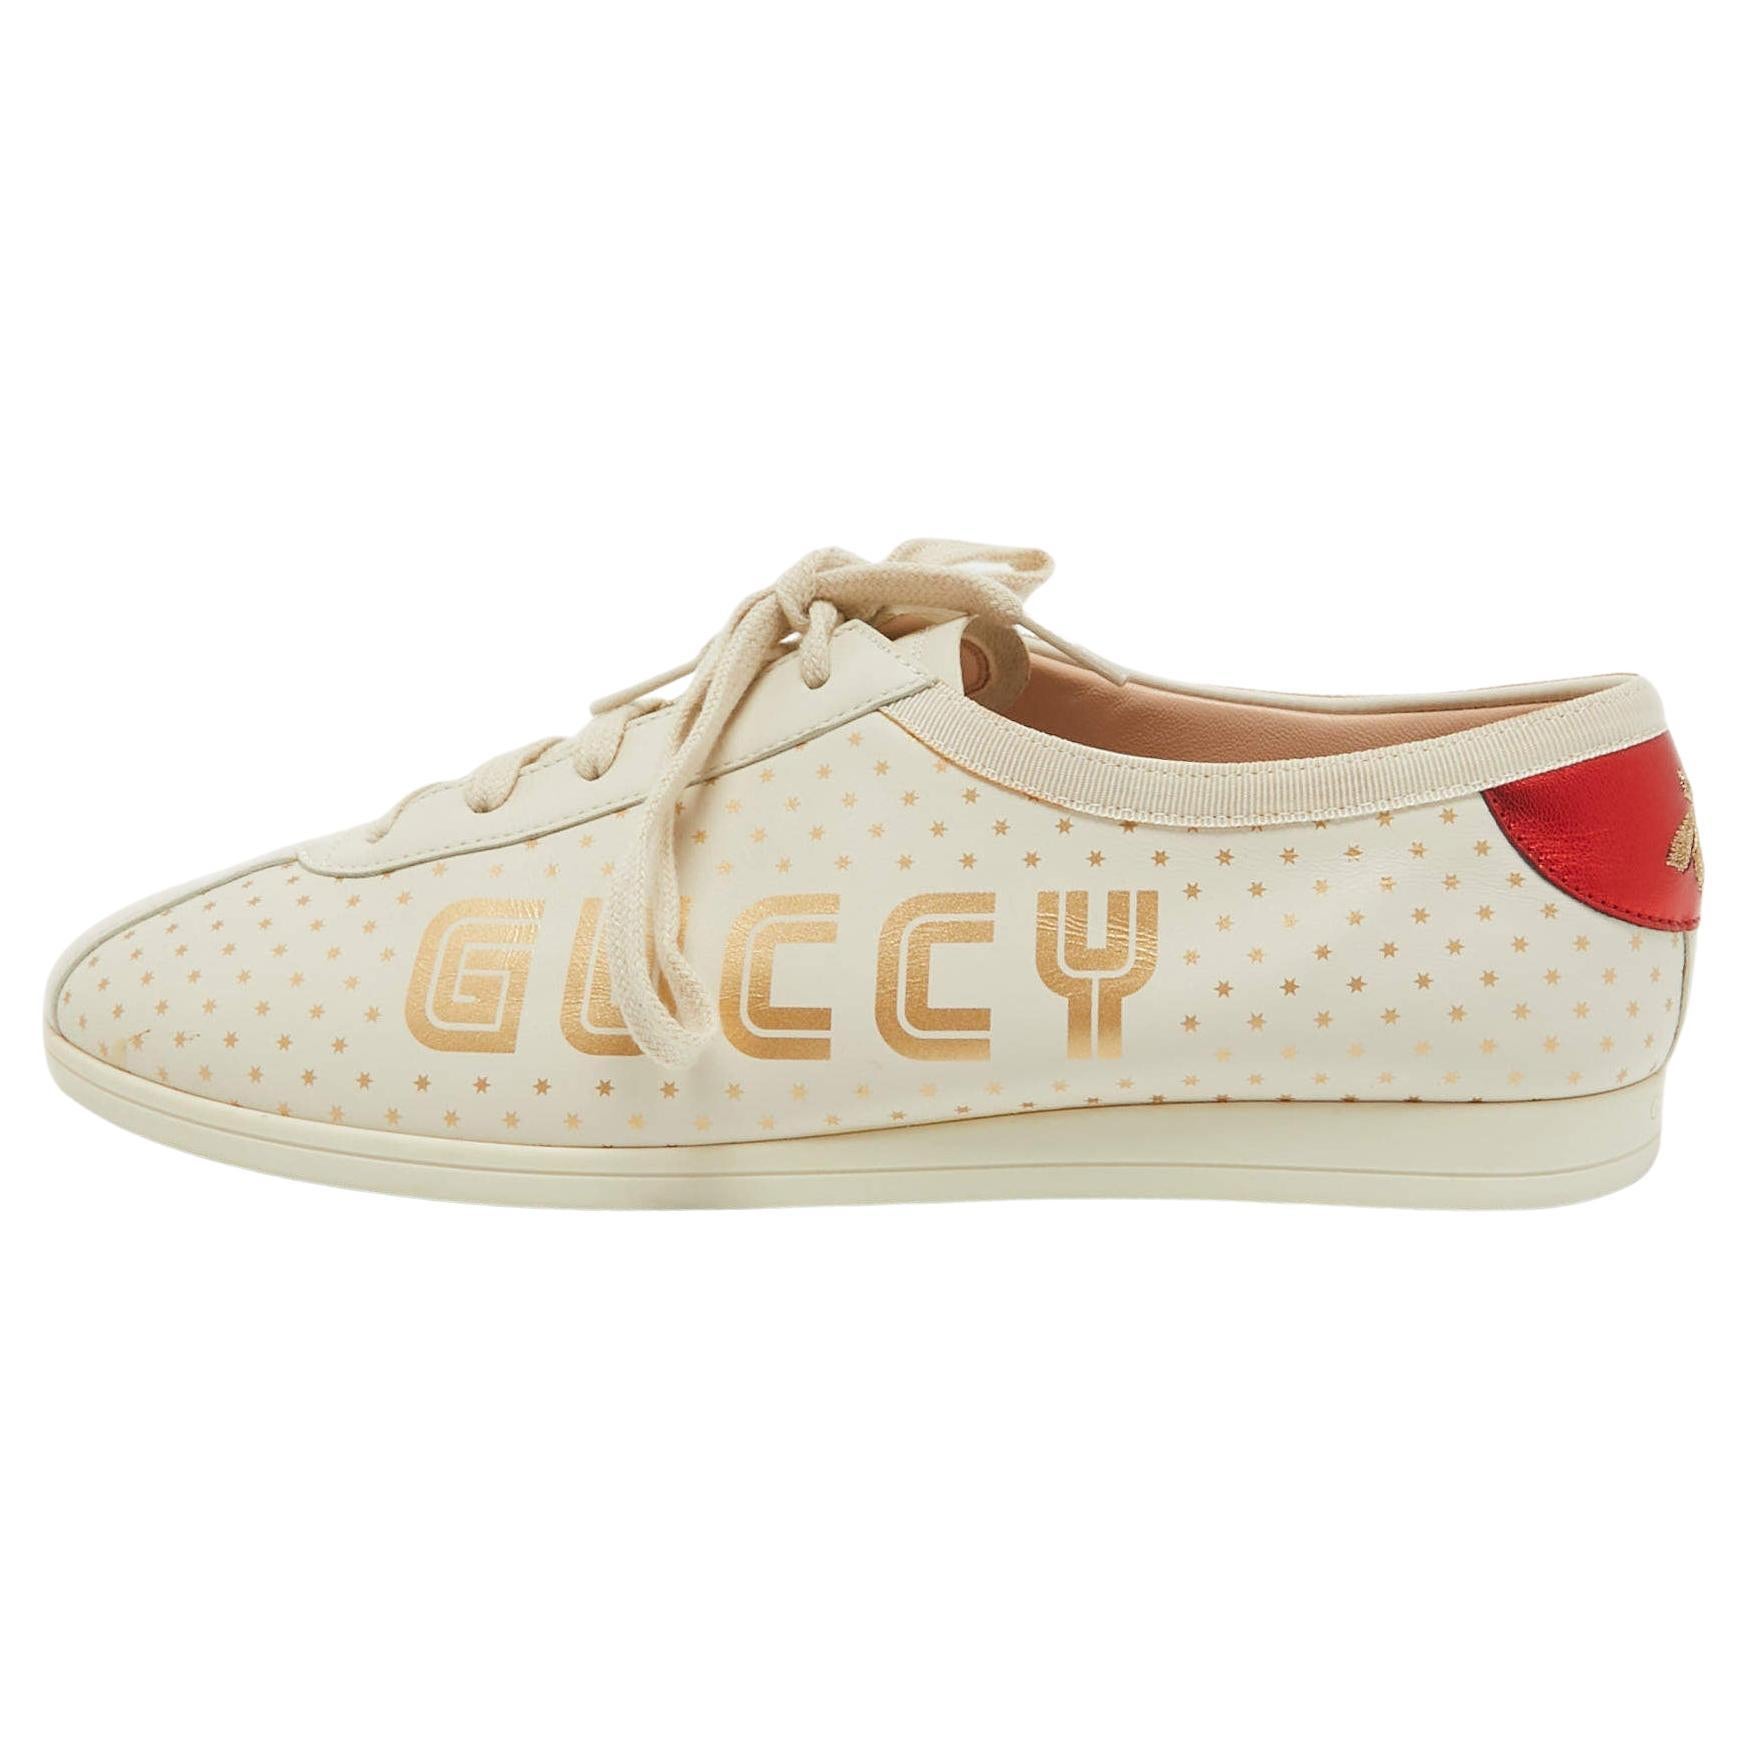 Gucci Cream Leather Falacer Low Top Sneakers Size 40 For Sale